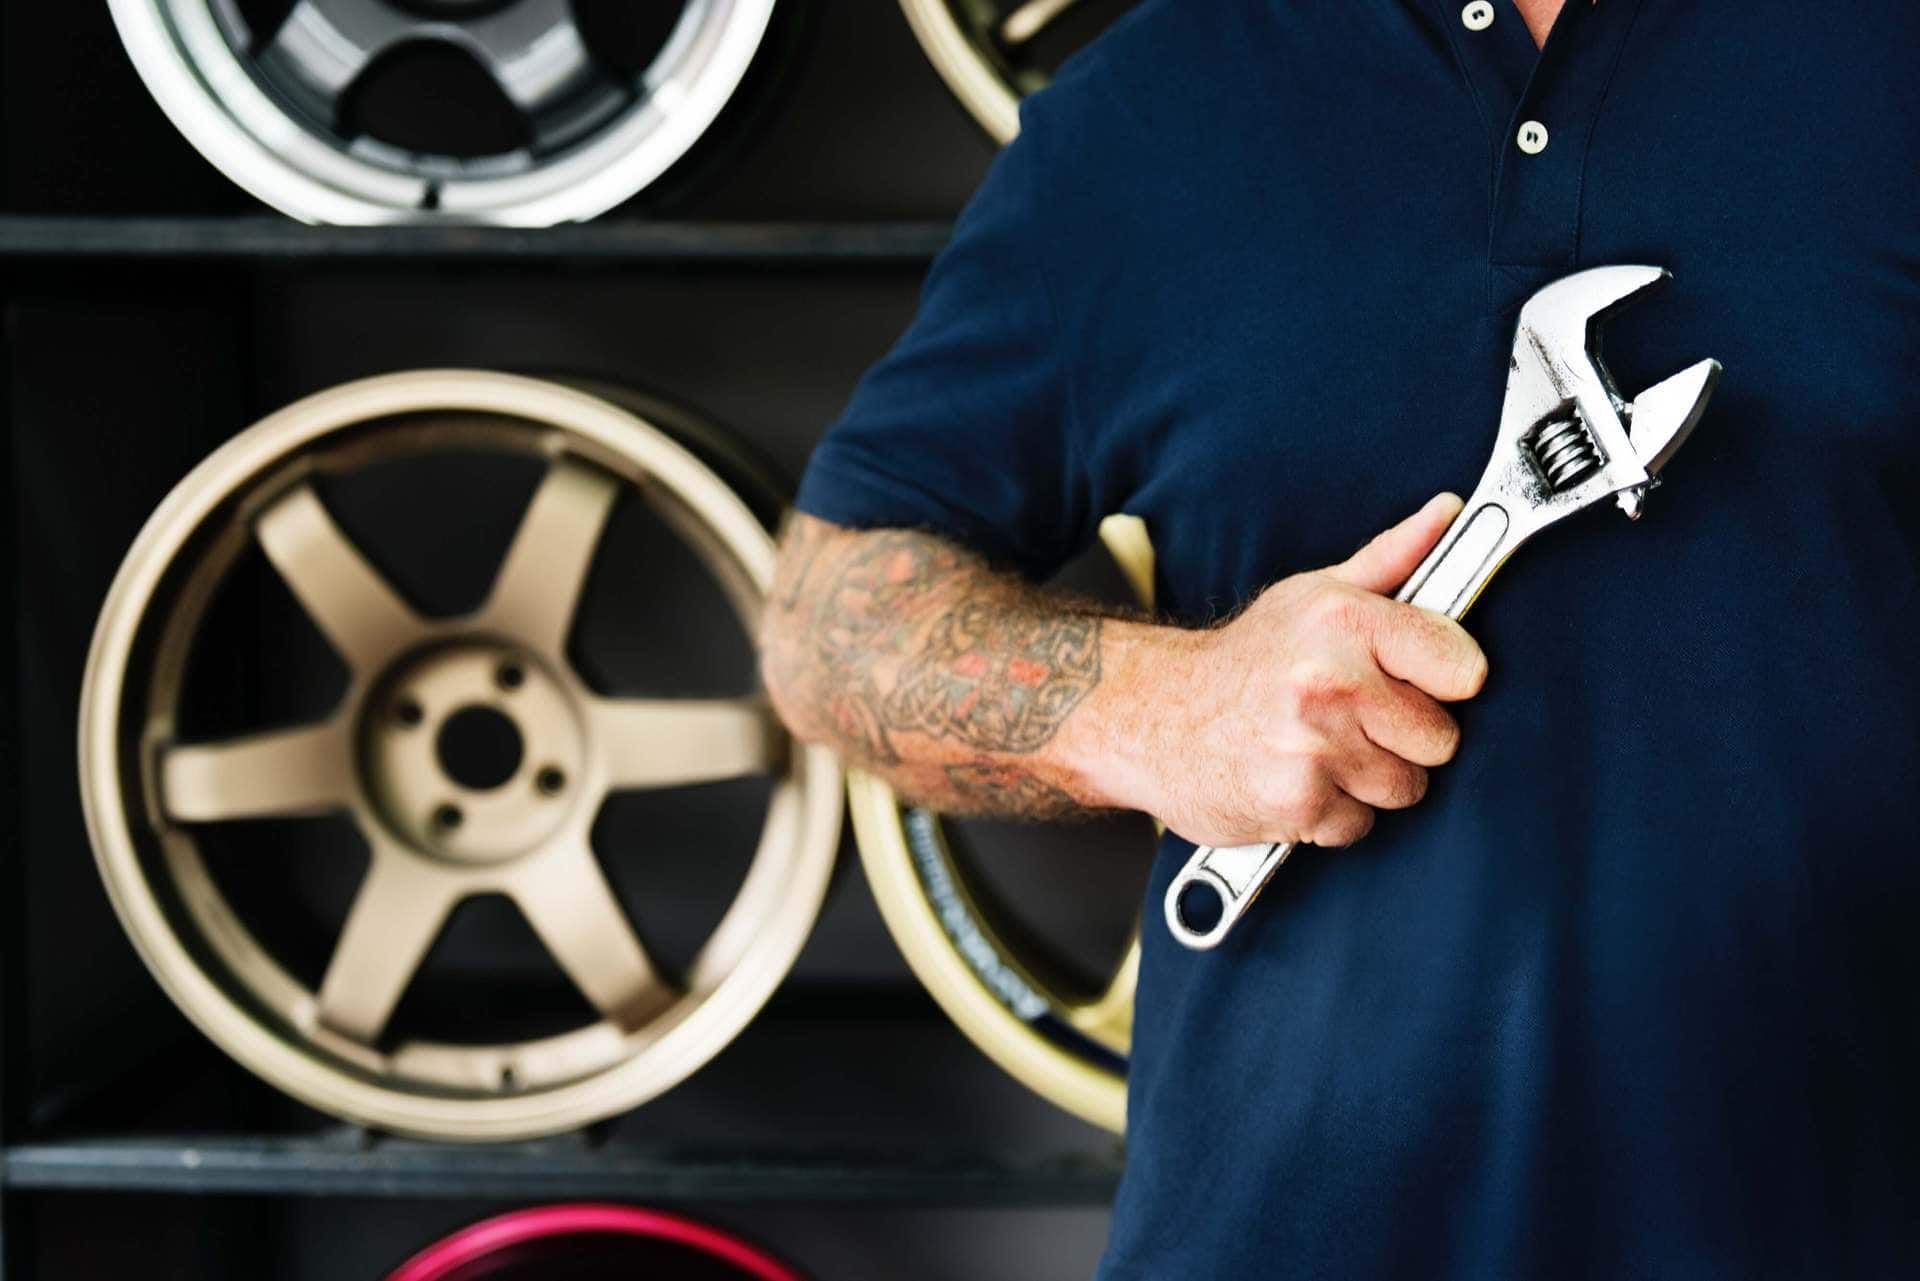 A man is holding a wrench in front of a display of wheels.